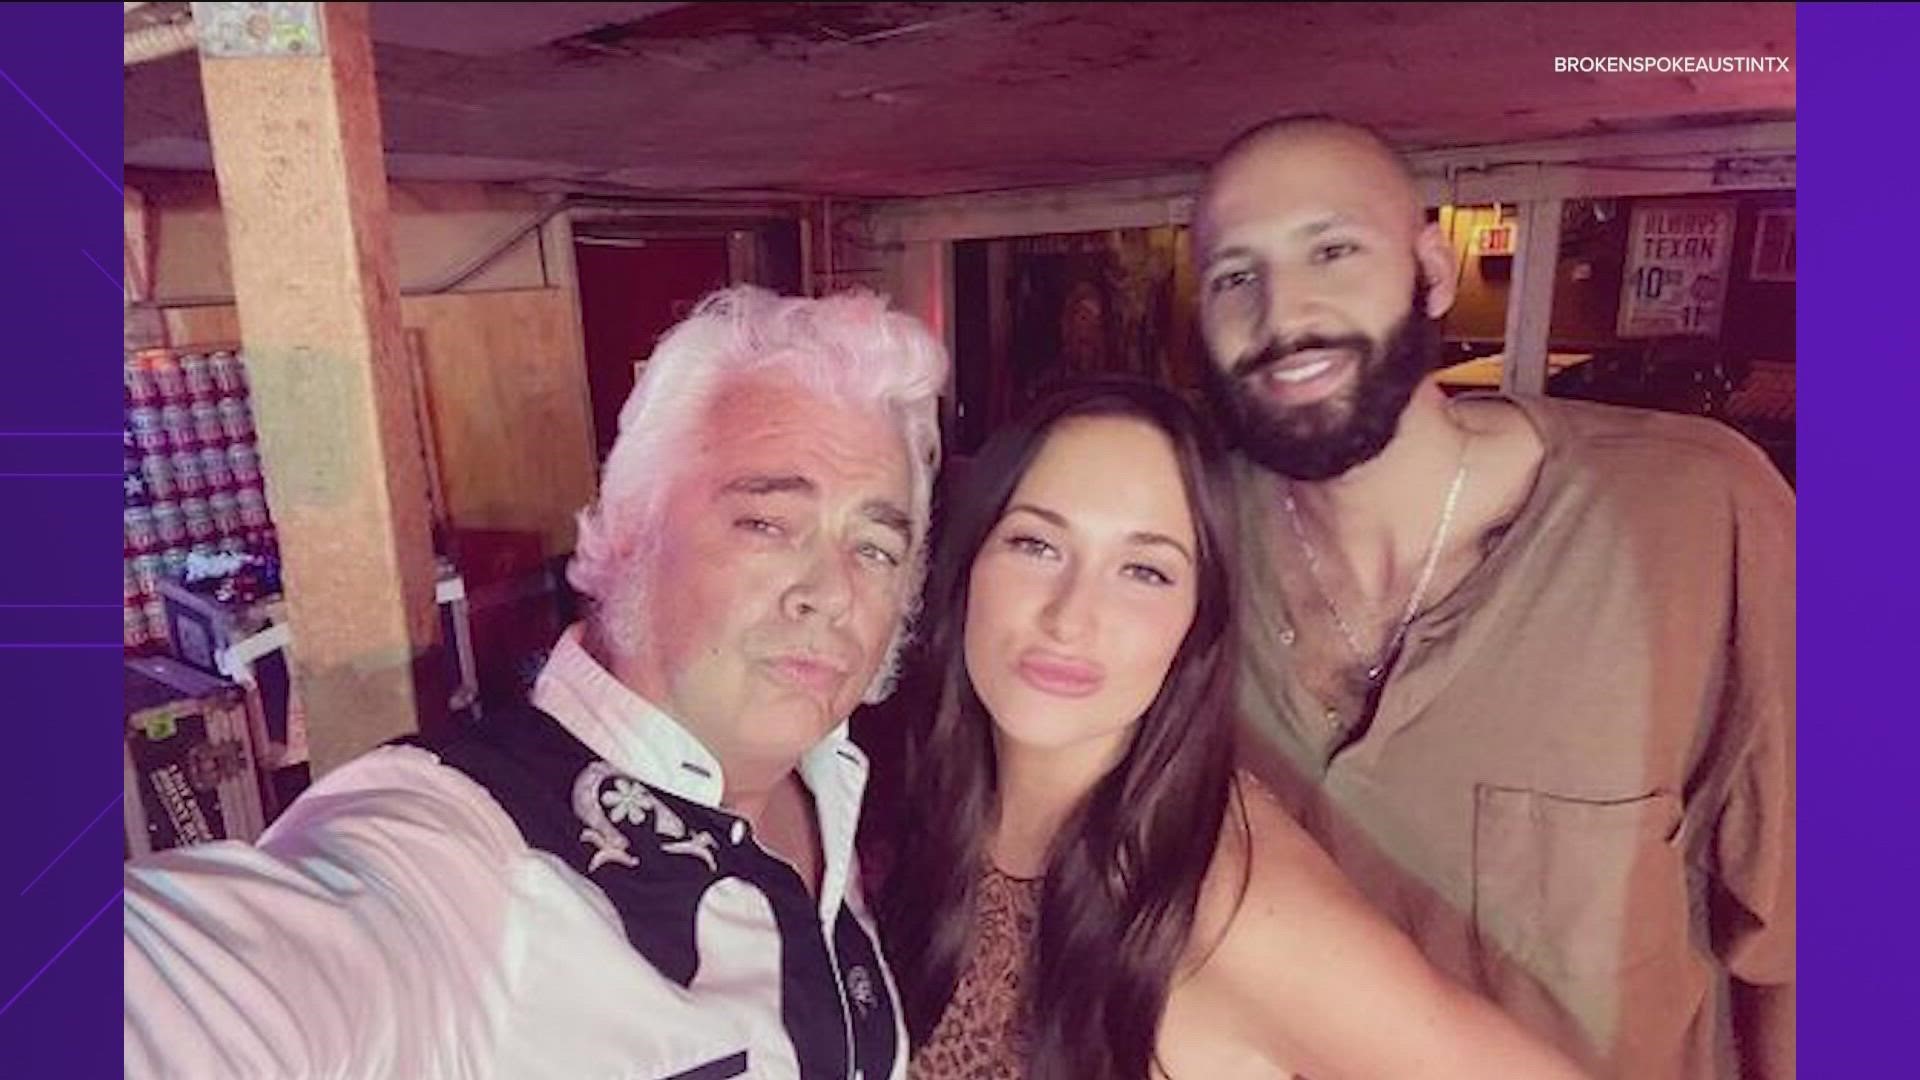 Musgraves posed for a photo with Dale Watson, who was performing that night.